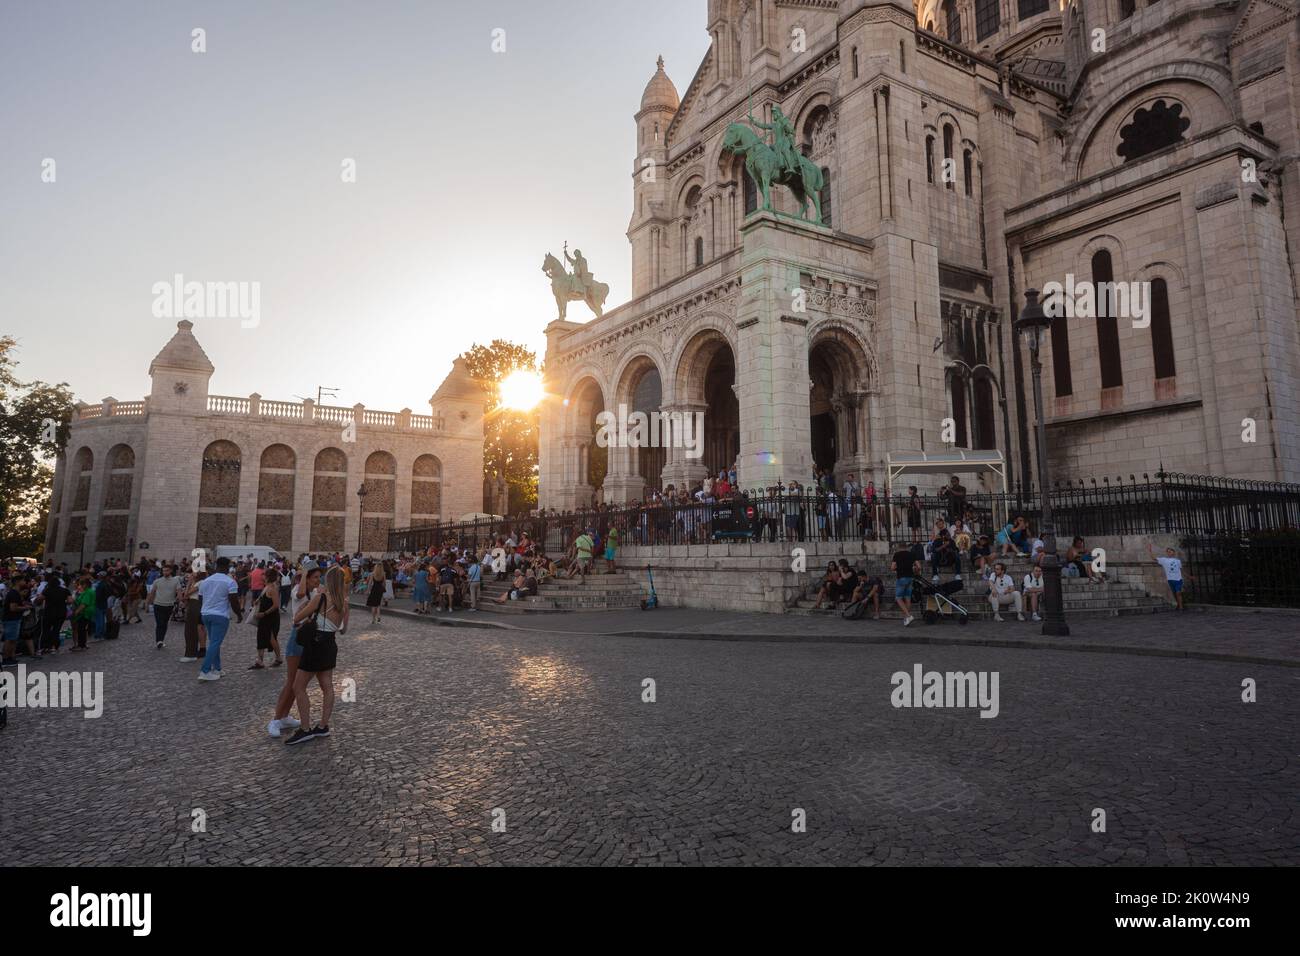 Sacre Coeur basilica, 'Basilica of the Sacred Heart of Jesus' with the Jeanne d'Arc statue in front of the main entrance. Paris, Montmartre, France. Stock Photo